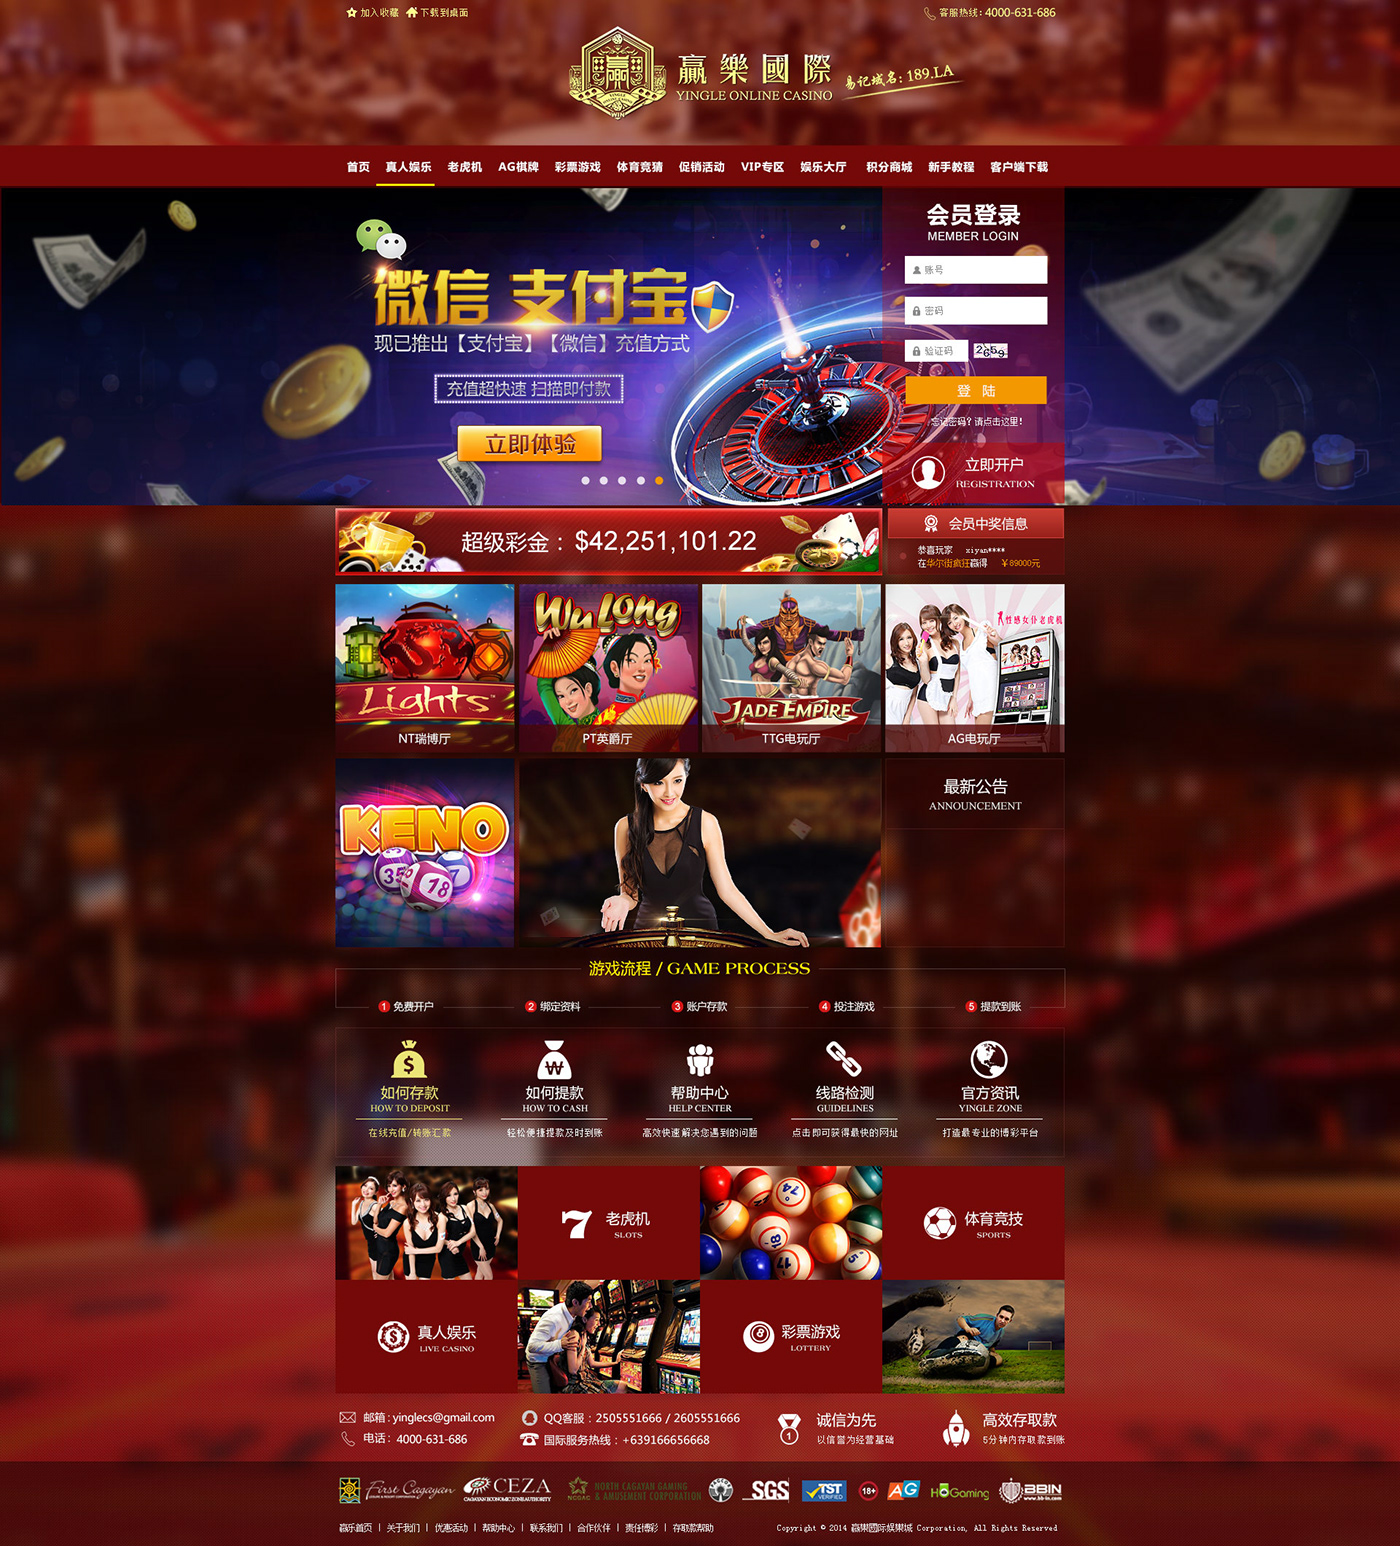 alipay banner casino iGaming wechat